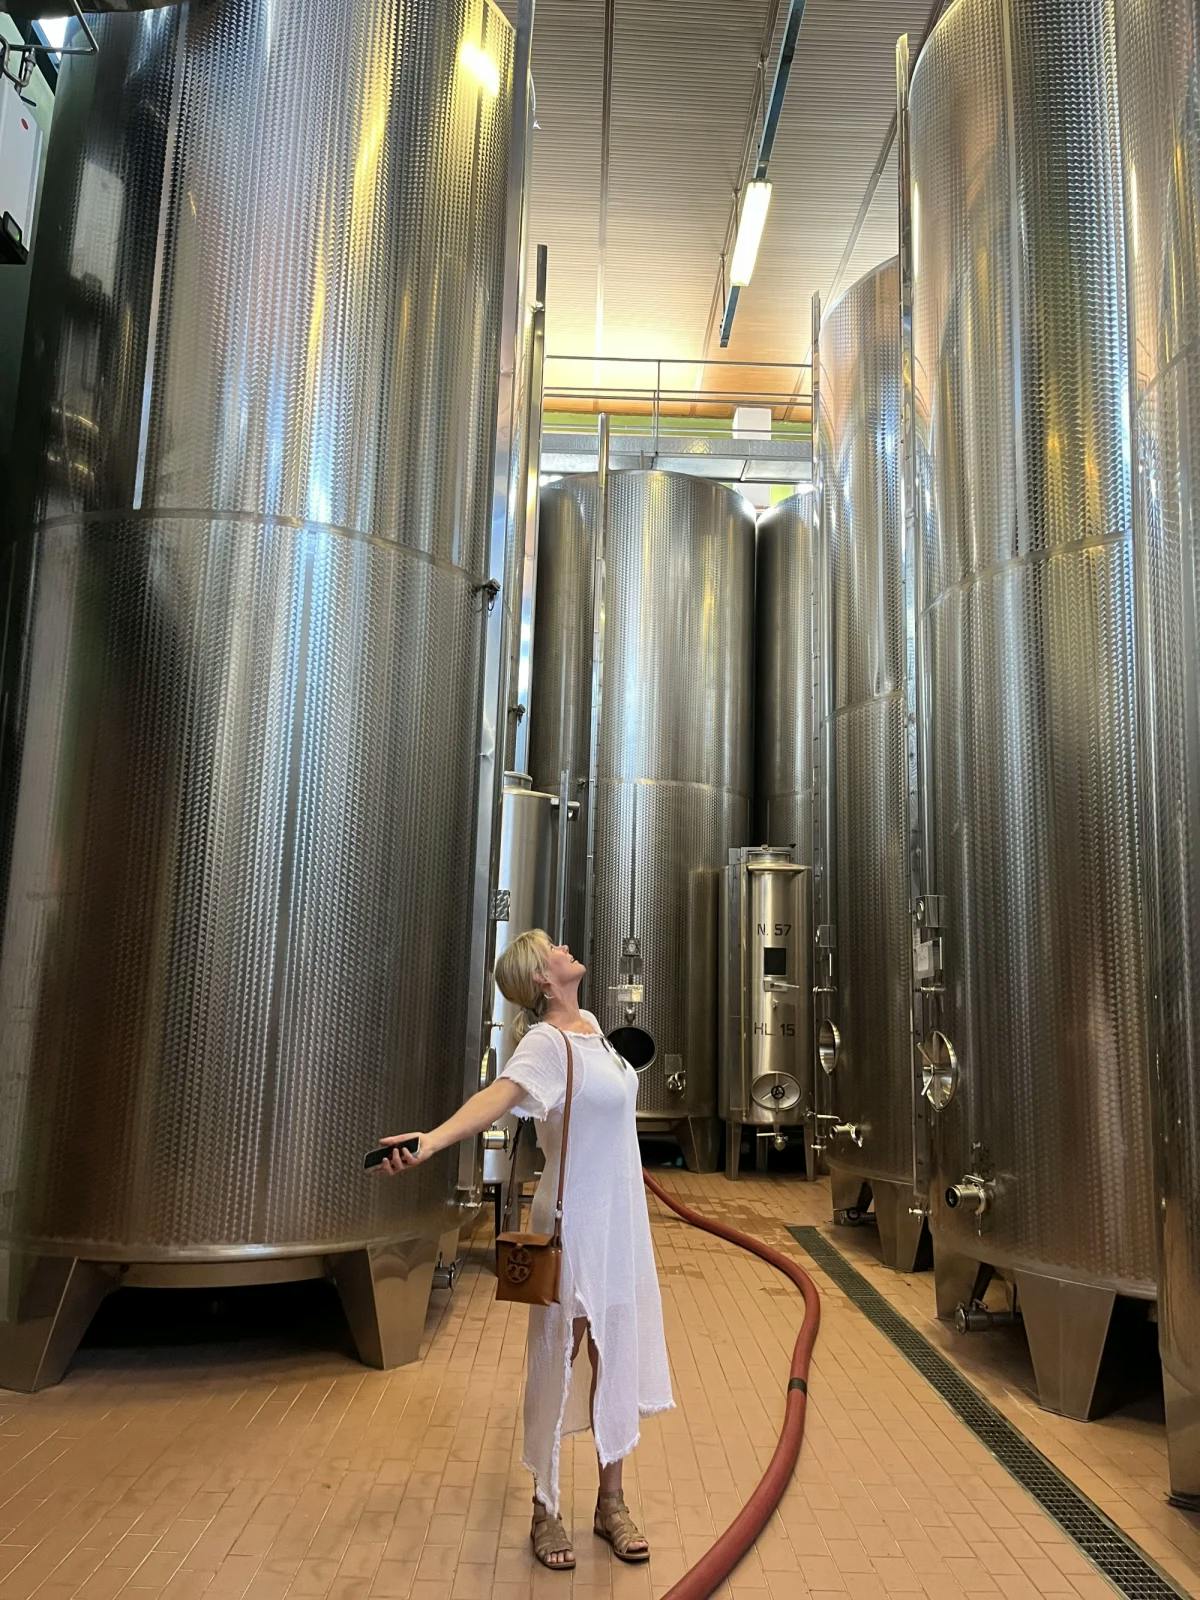 A person standing in a room with large metal vats 